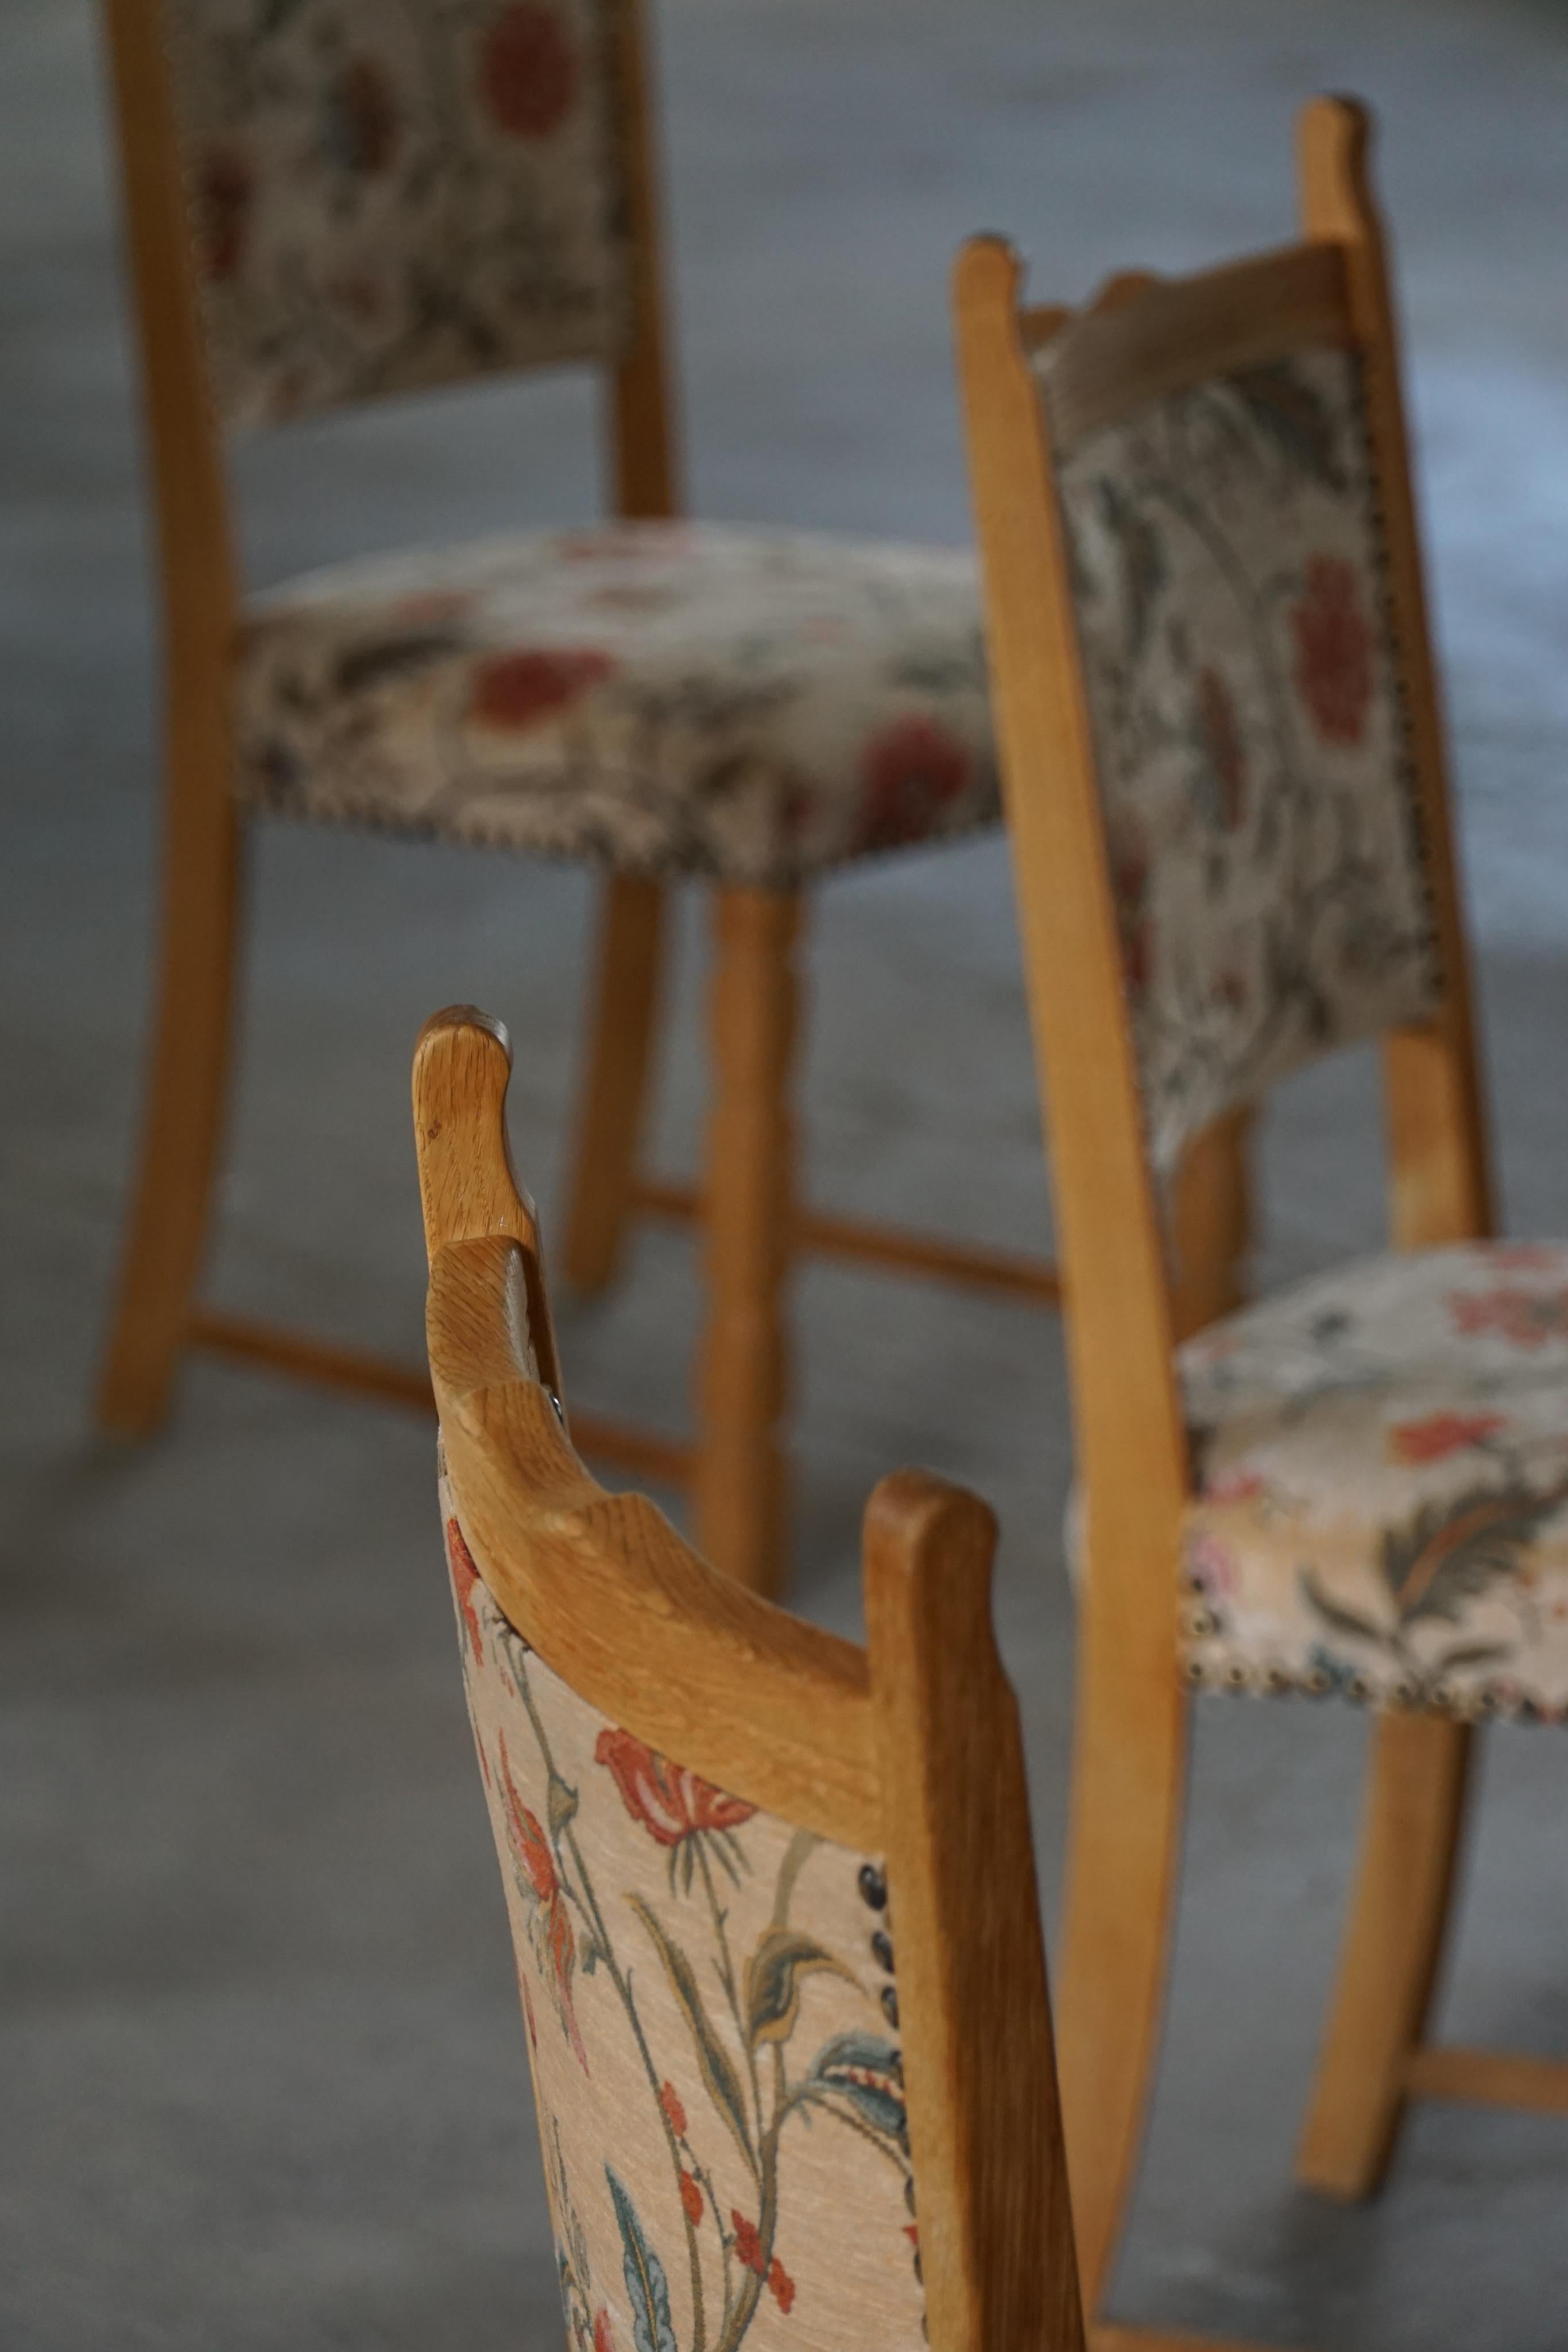 A Set of 6 Dining Room Chairs in Oak & Fabric by a Danish Cabinetmaker, 1950s For Sale 15